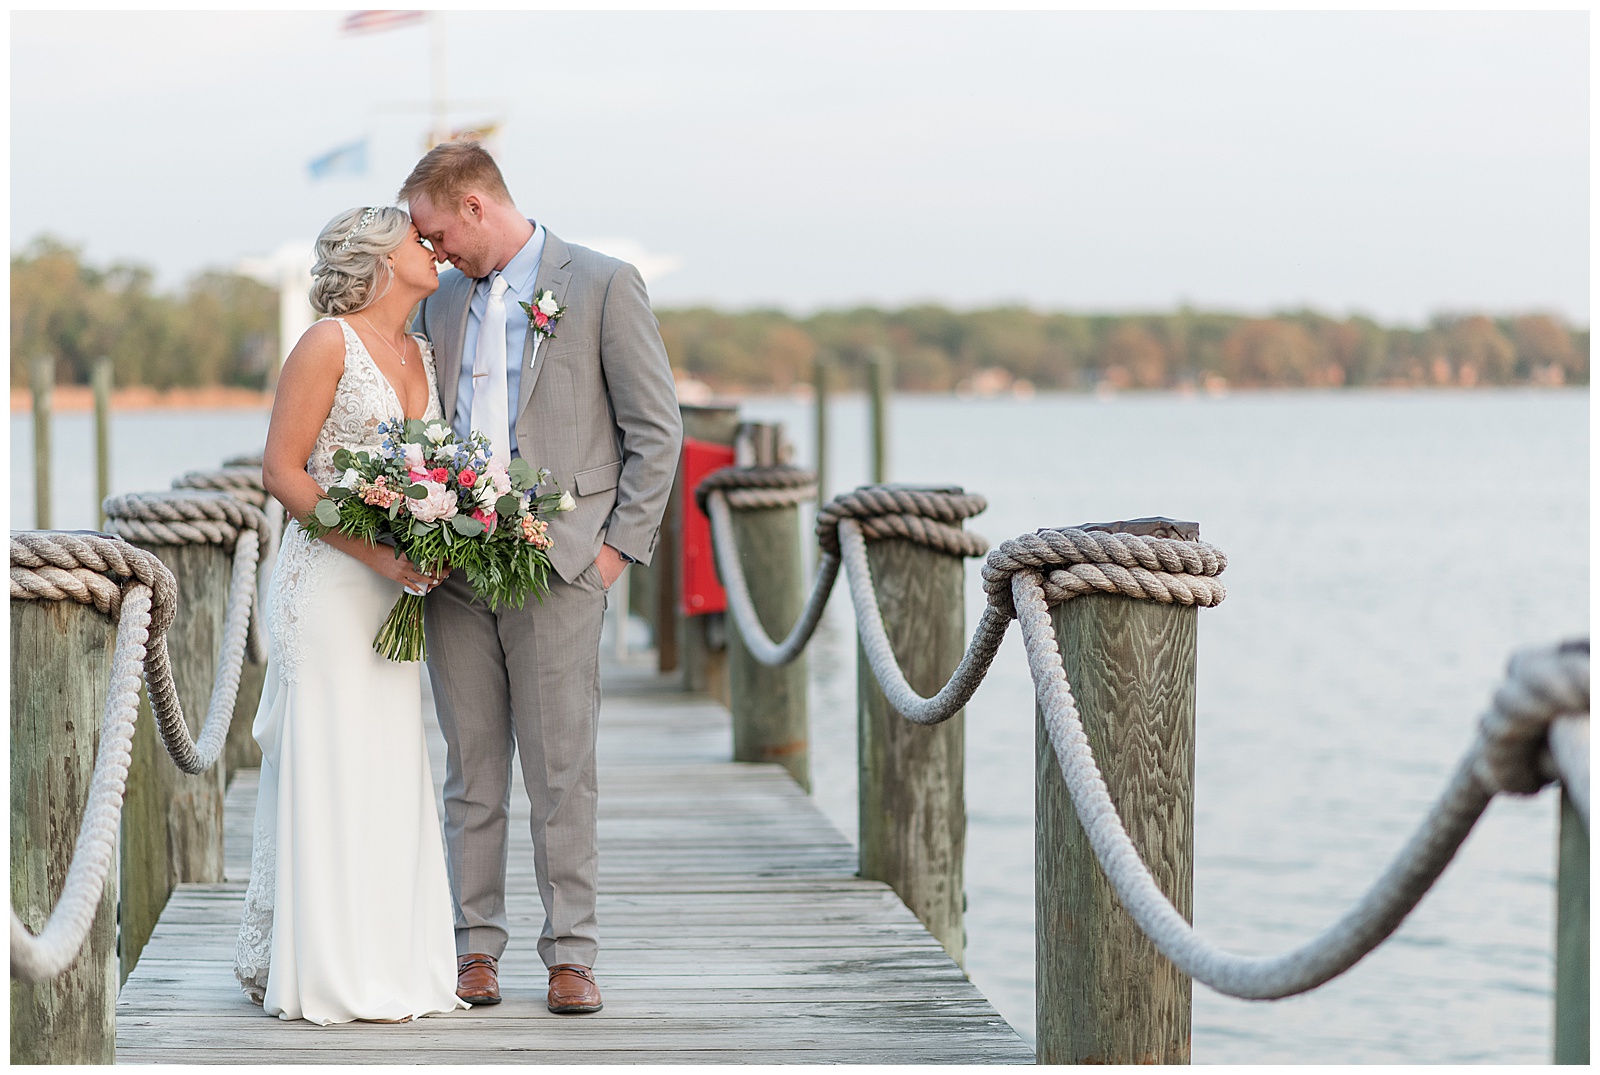 bride holding bouquet and snuggling tightly with groom on beautiful dock along water at water's edge event center